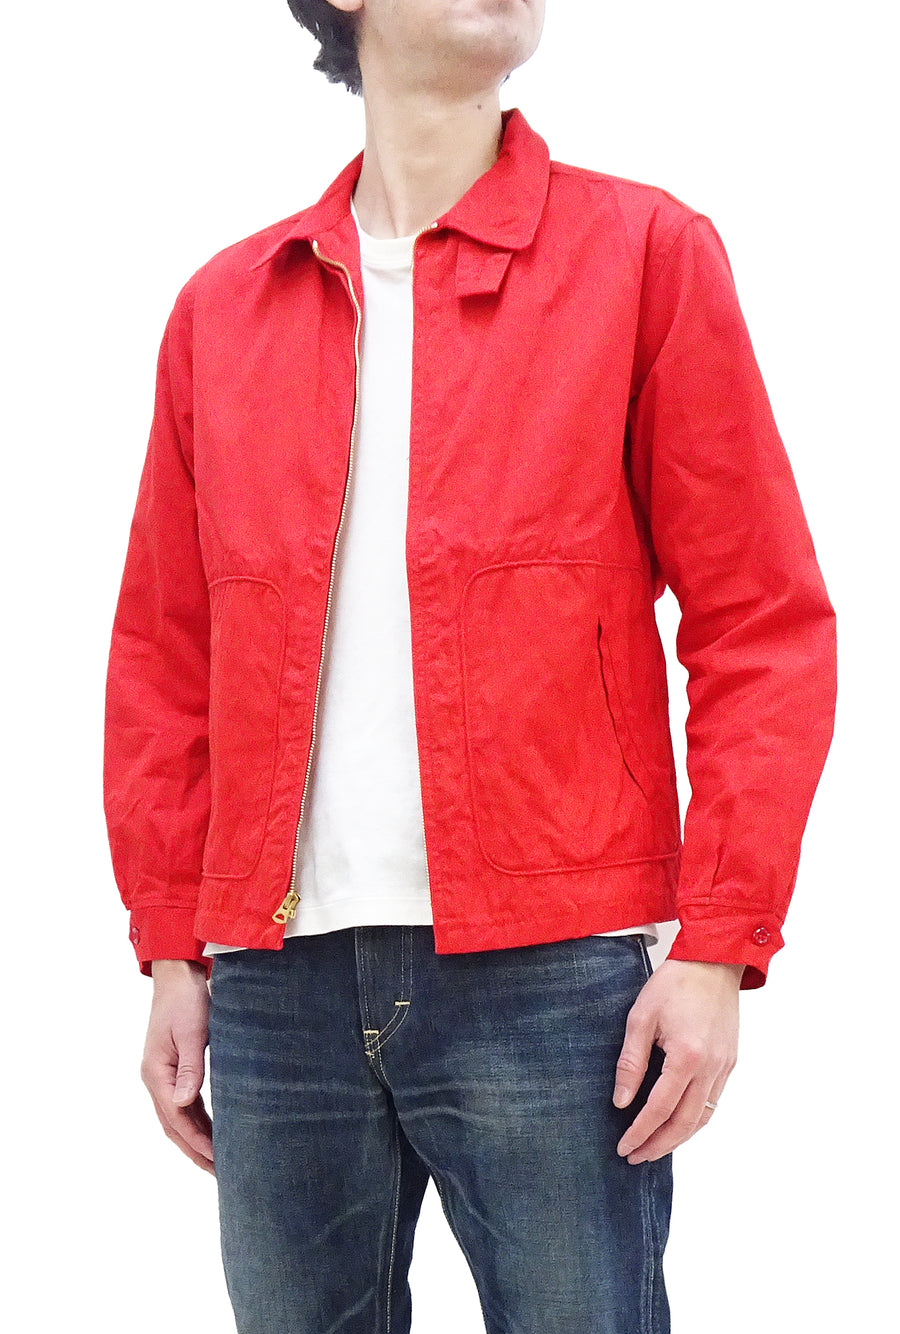 Sugar Cane Jacket Men's Casual 1950s Style Lightweight Unlined Cotton Jacket SC15293 165 Red